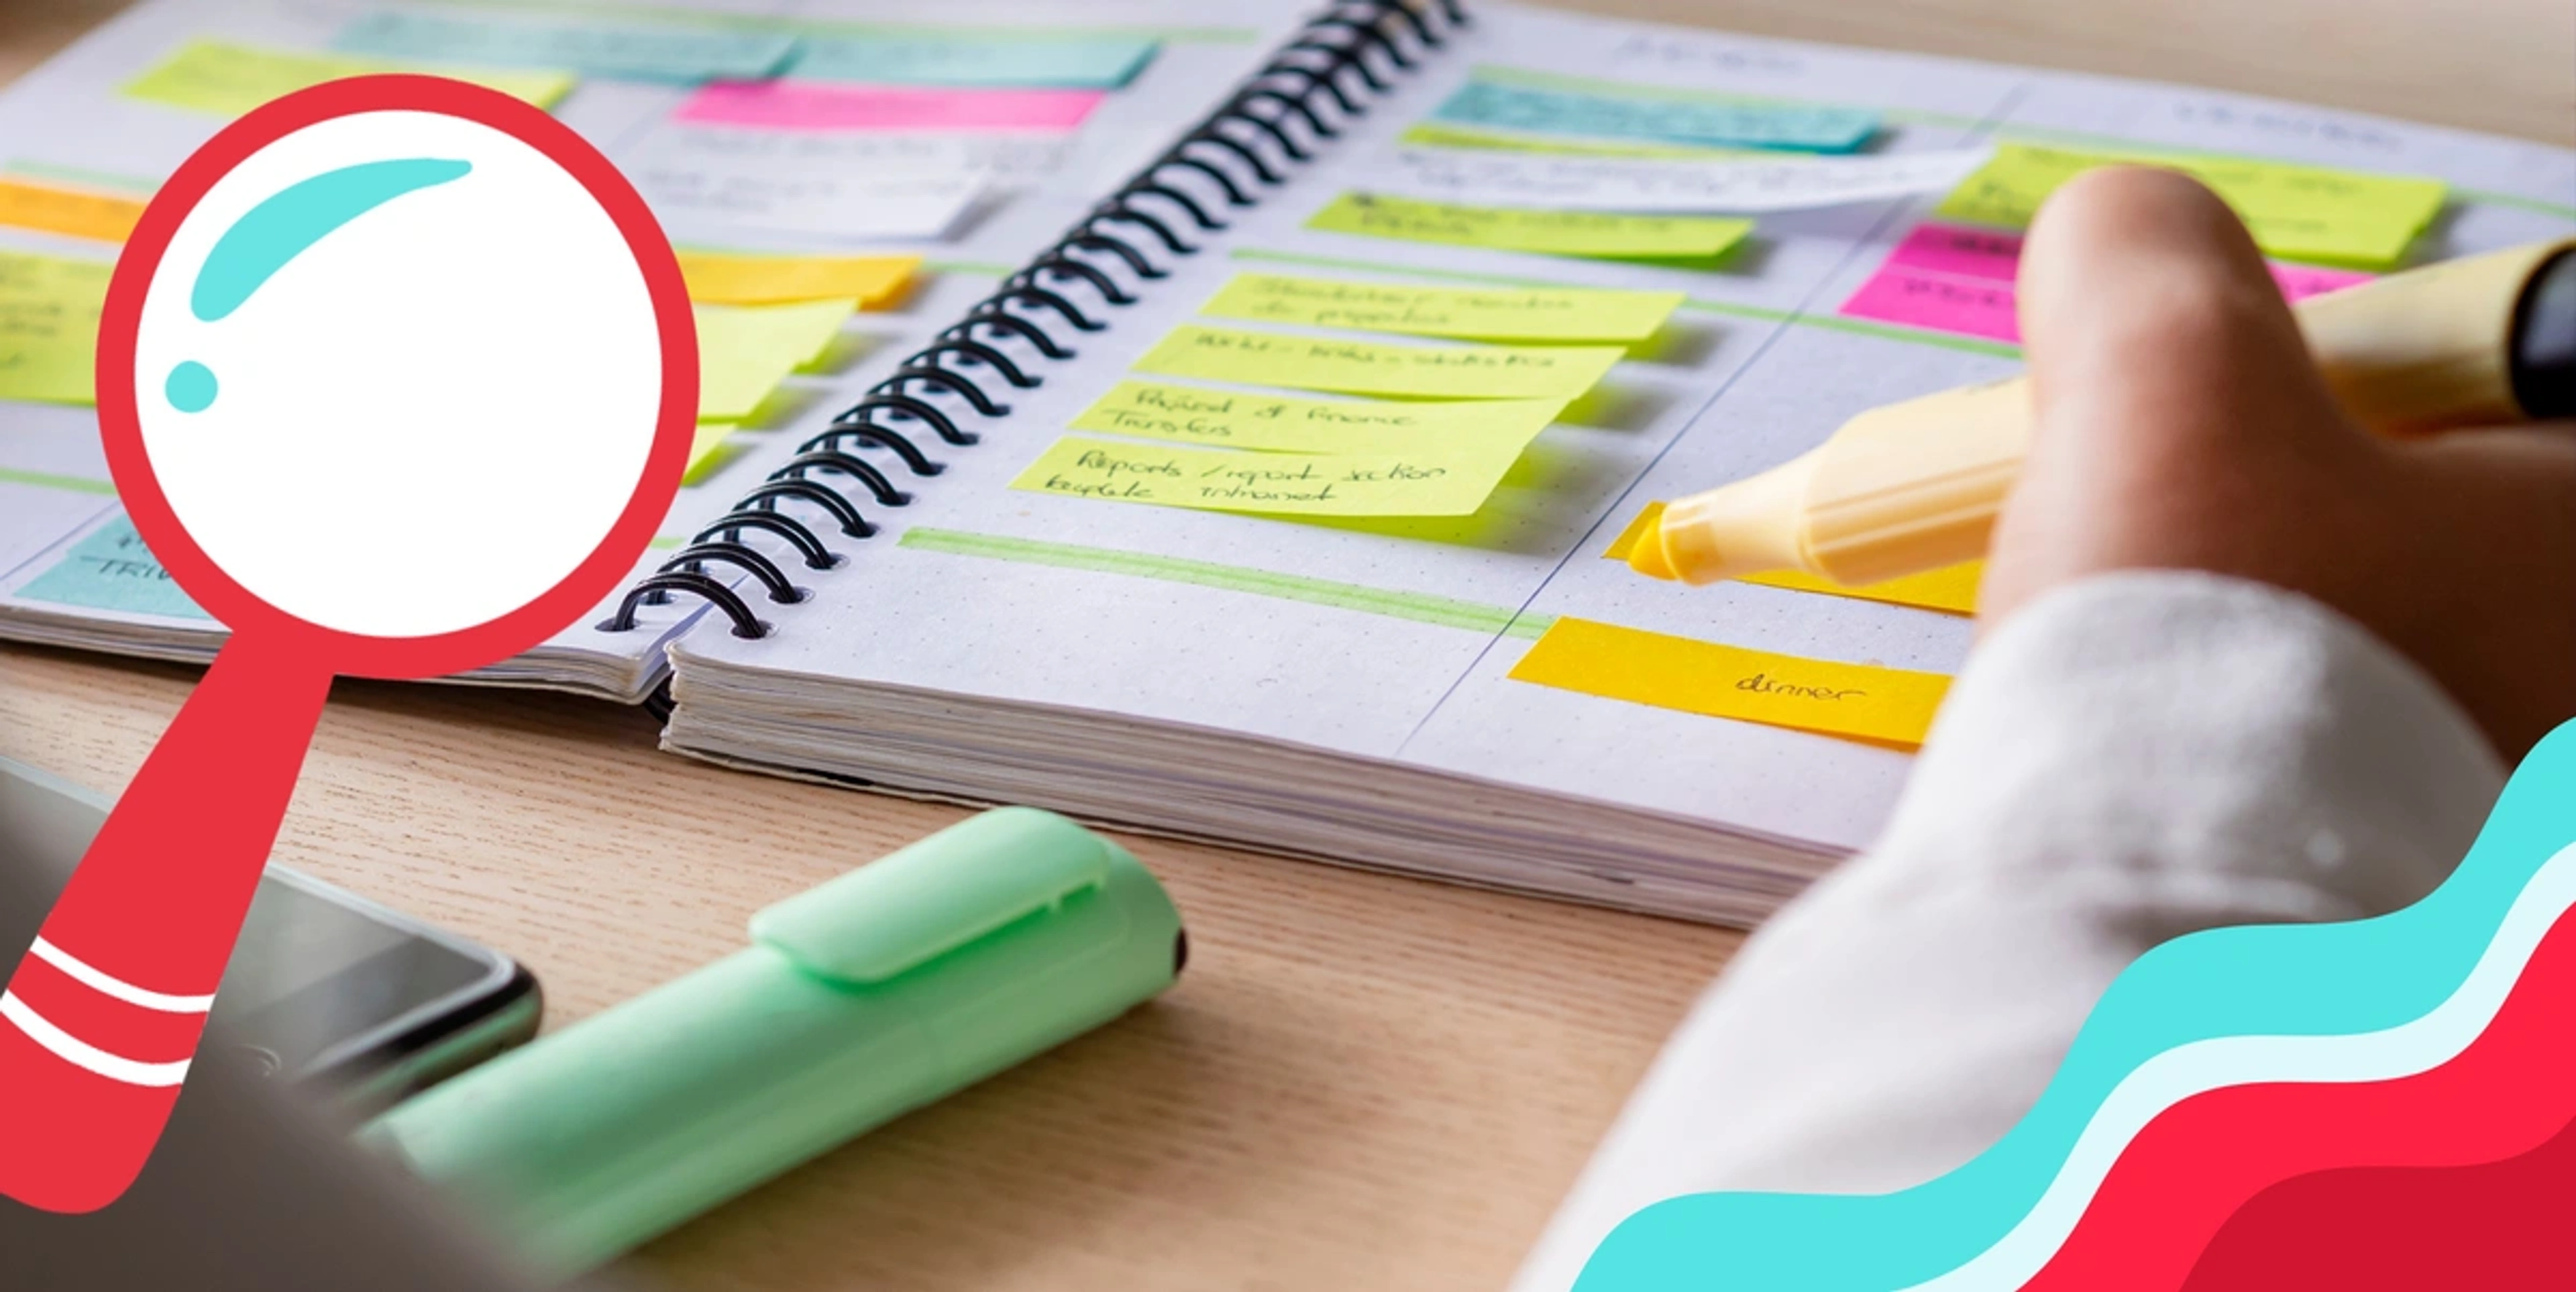 Featured Image: 7 Tips to Organize Your Job Search, woman holding highlighter looking at planner